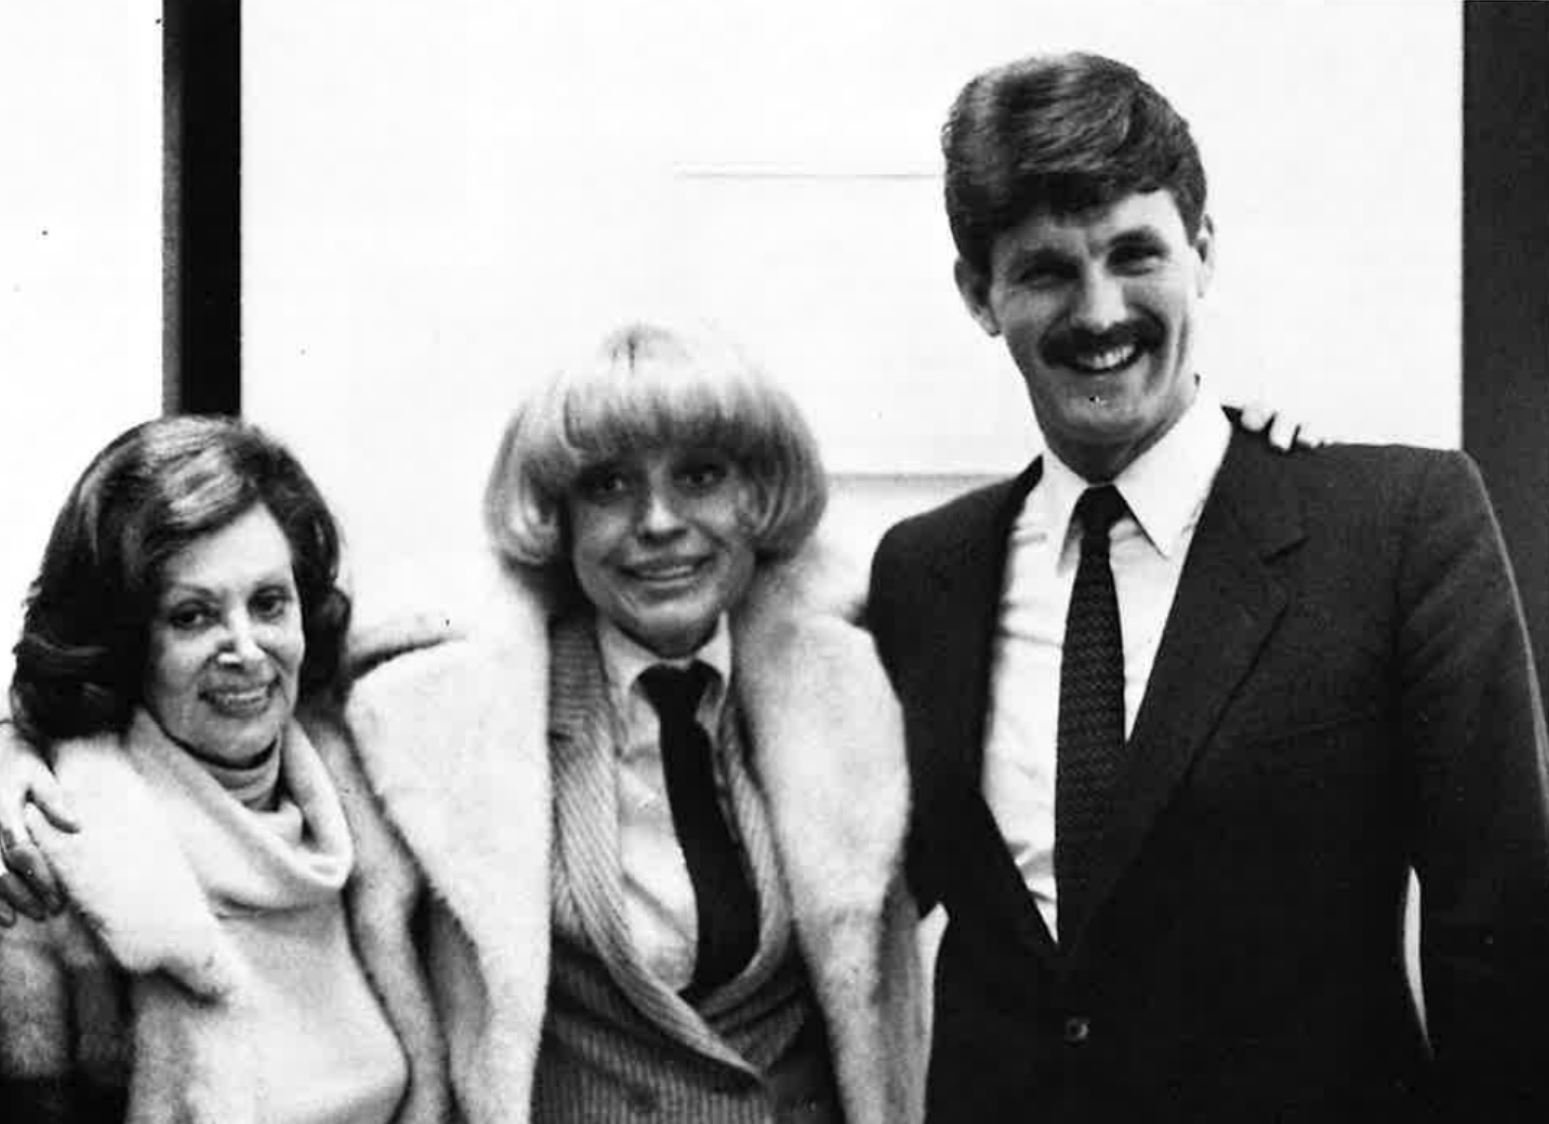 From left to right: Essee Kupcinet, Carol Channing, and Larry Jordan. They are smiling at the camera with their arms around each other's shoulders.